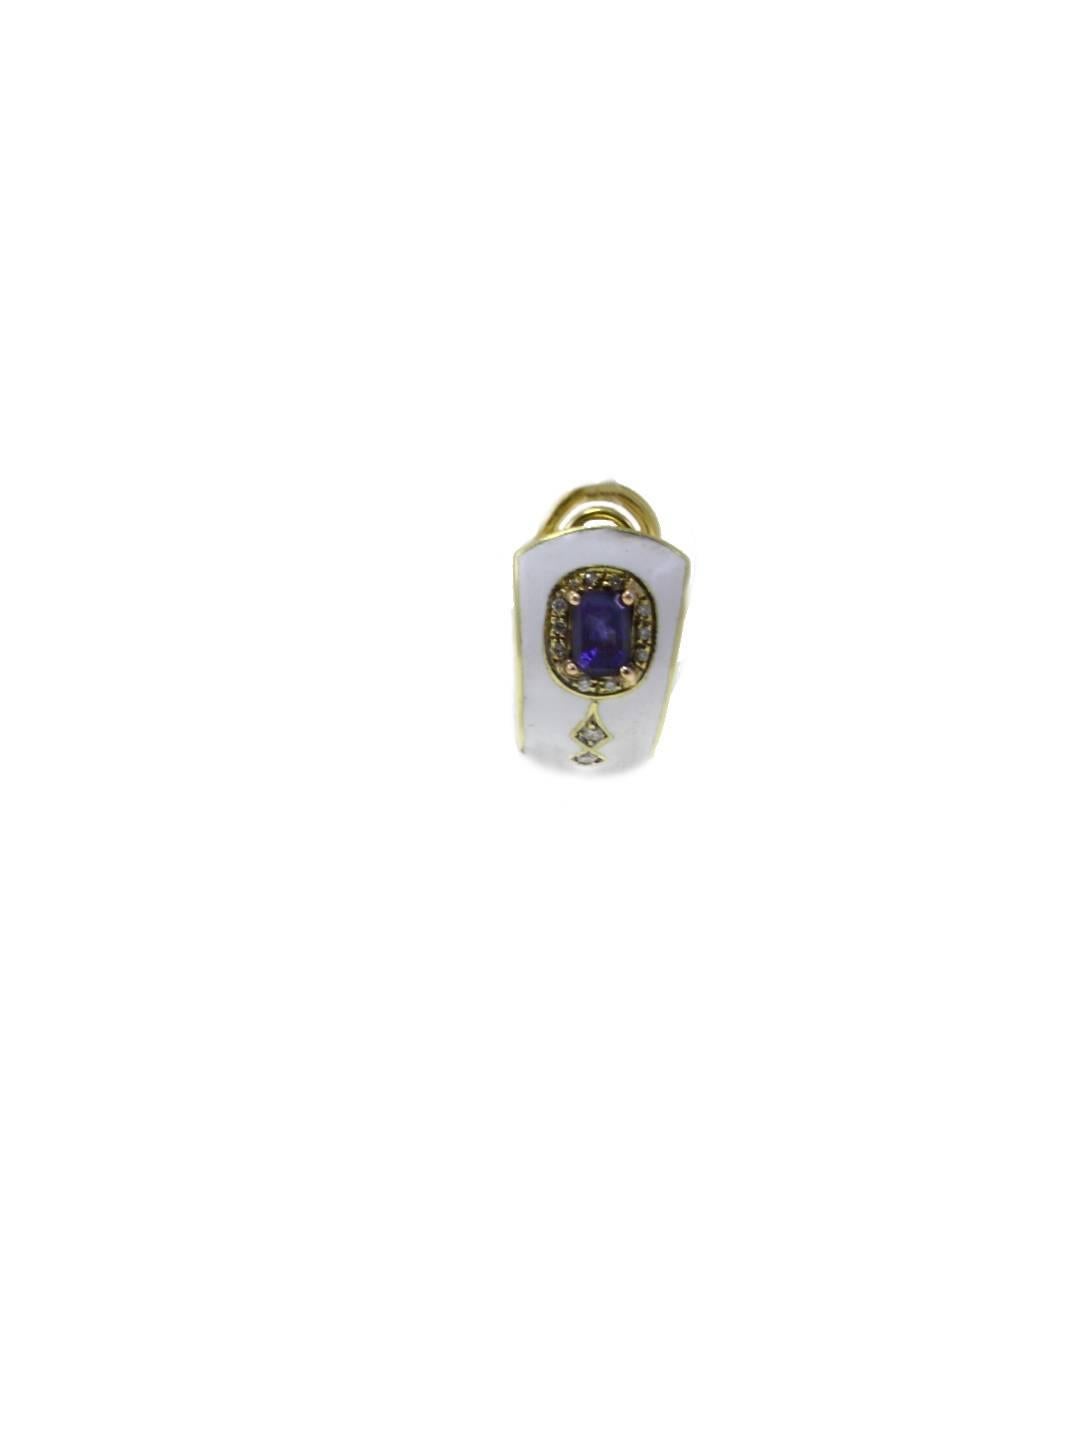 White clip-on earrings in 18kt yellow gold composed of a central blue sapphire surrounded by diamonds.

diamonds 0.22kt
sapphire 1.40kt
tot weight 15.6gr
r.f. grrr